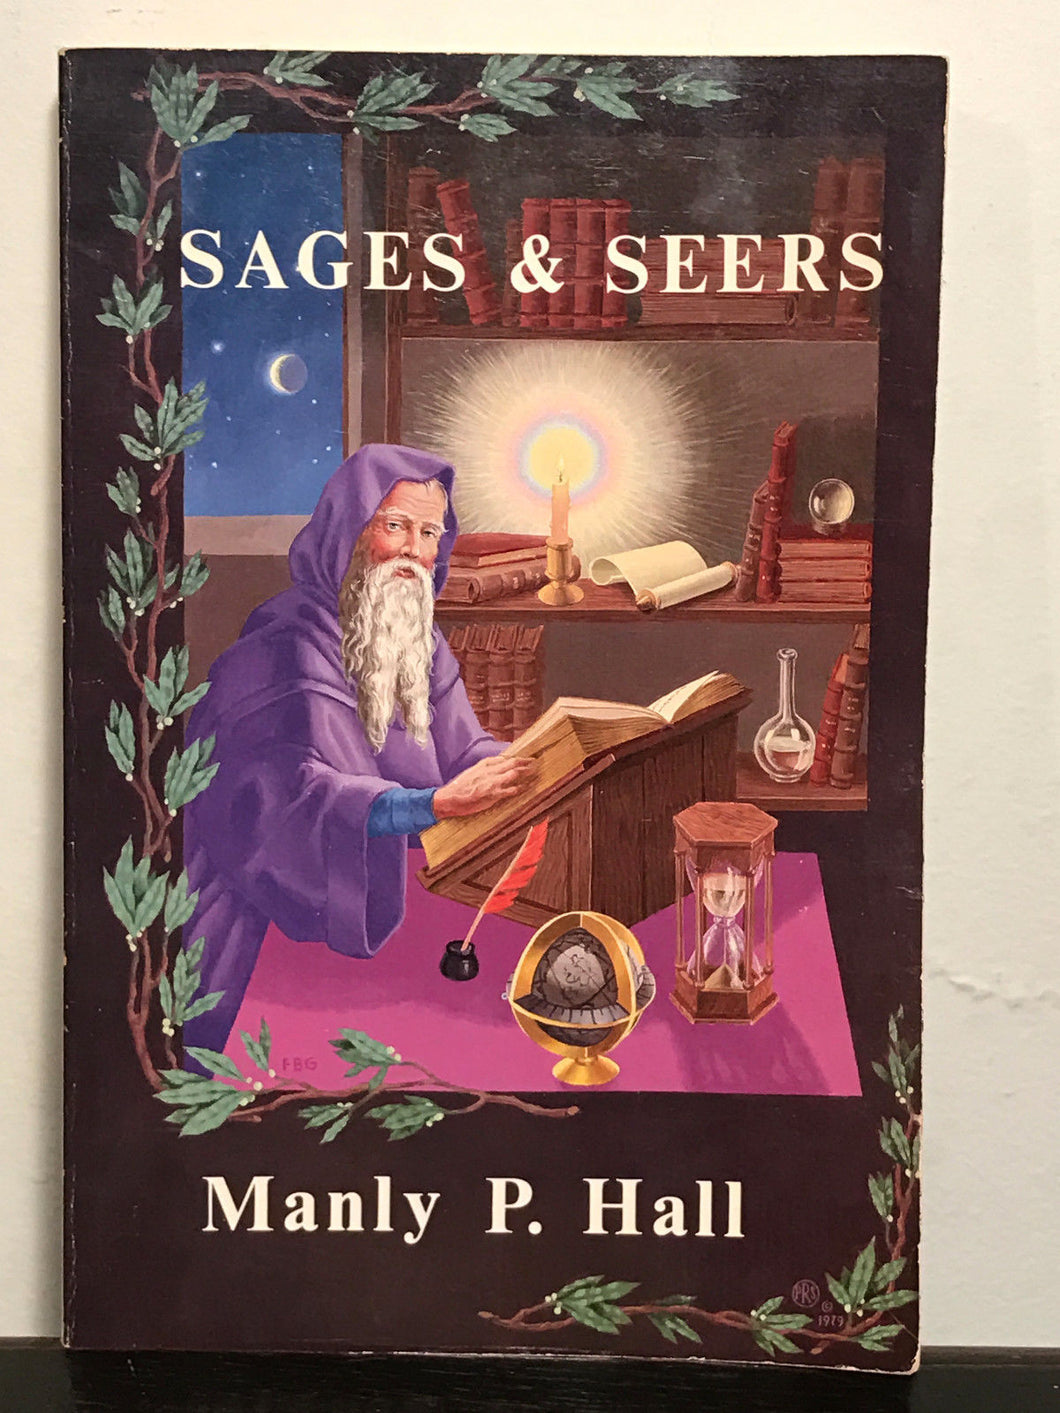 SAGES & SEERS by MANLY P. HALL, SC, Illustrated 1979